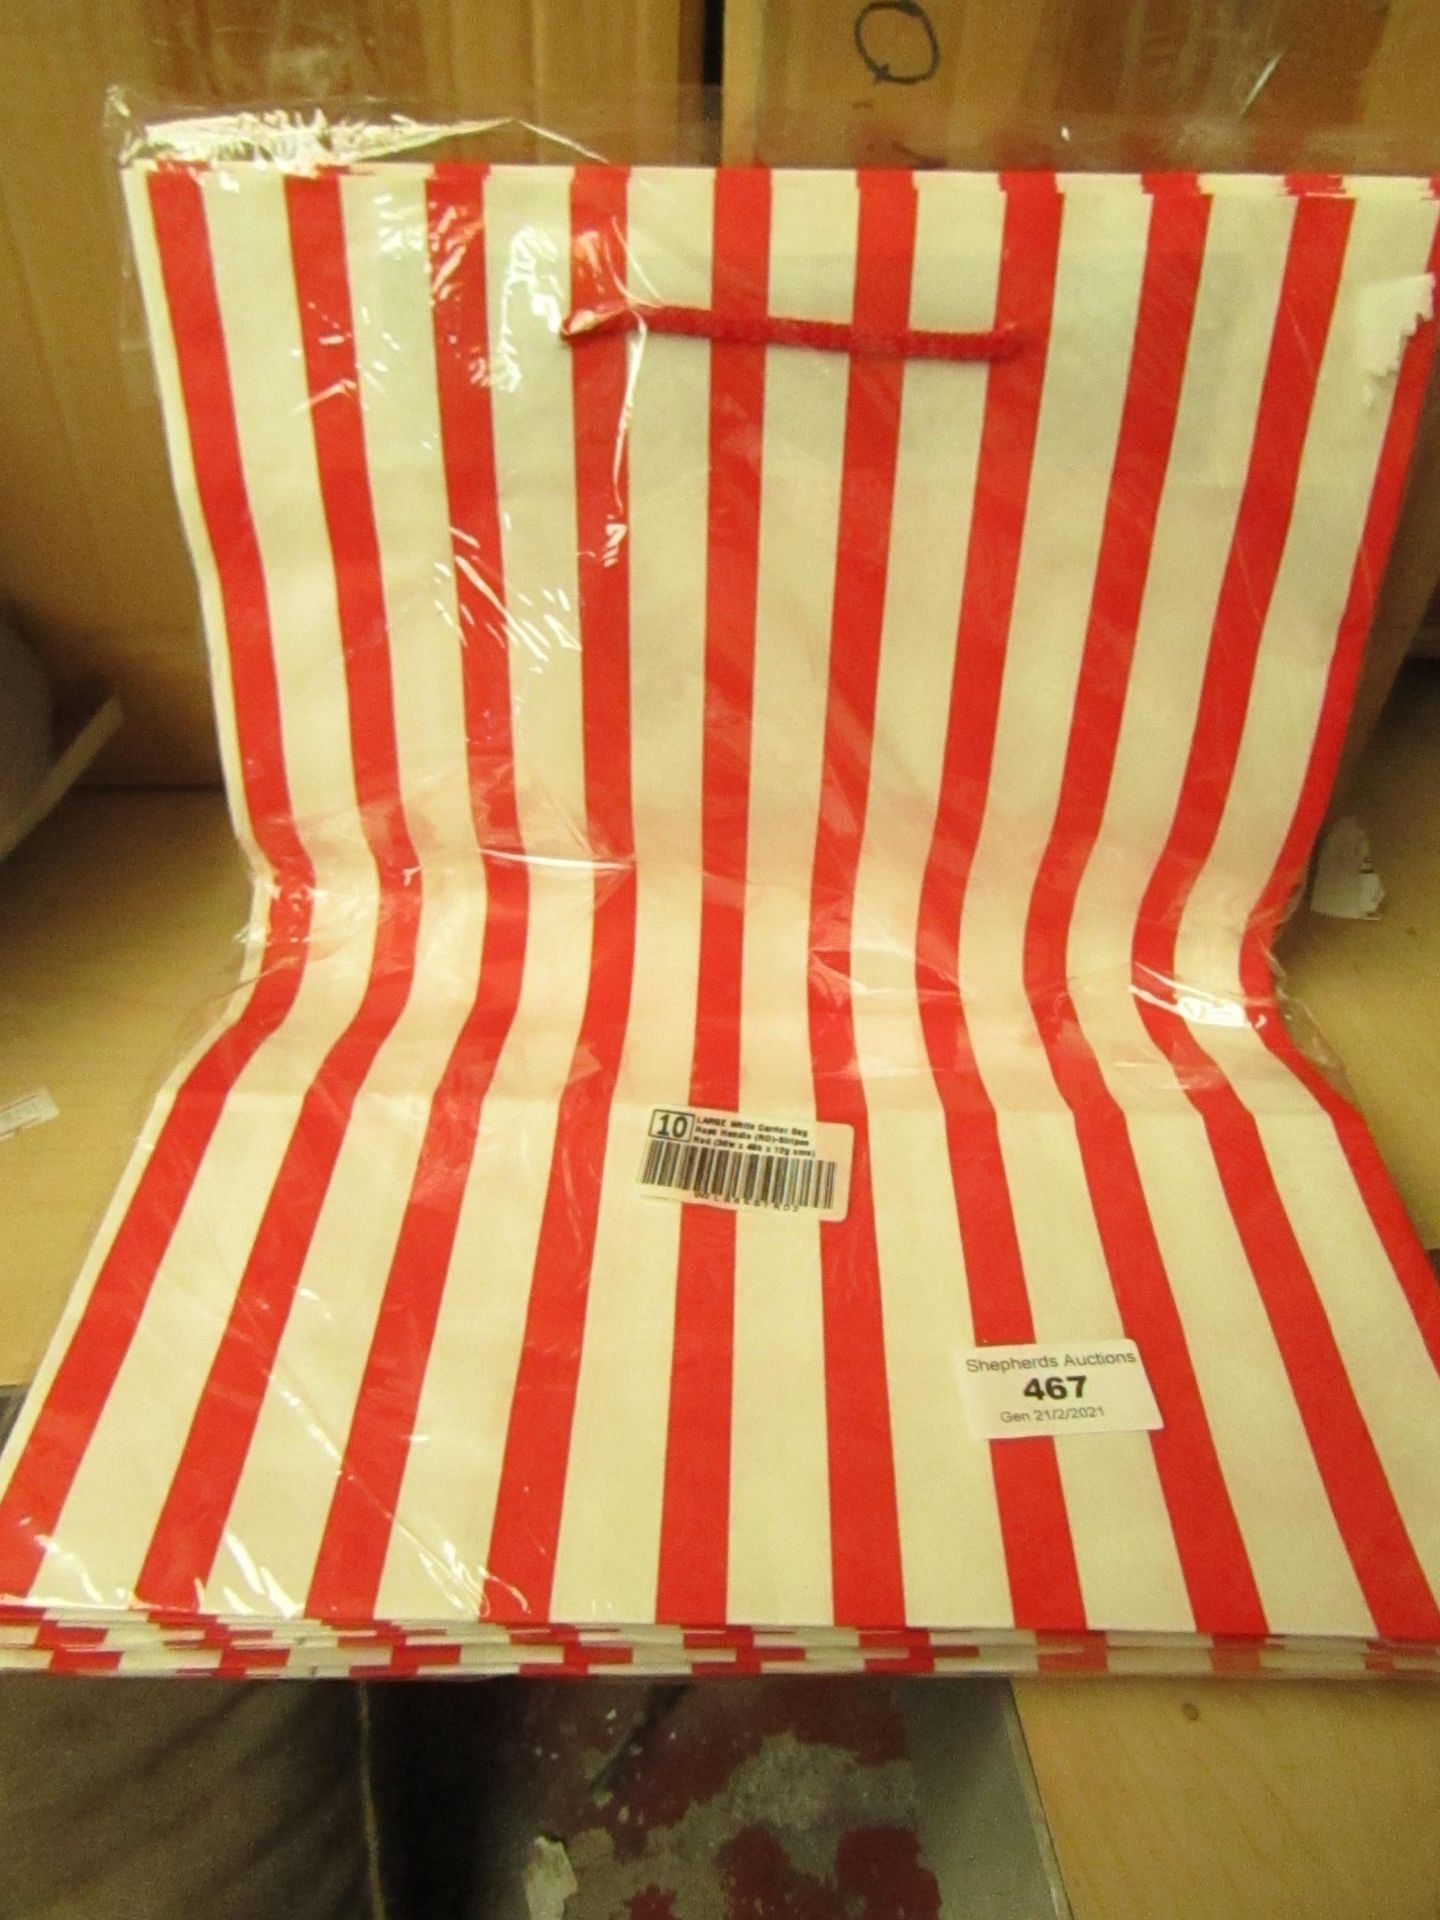 10x red and white carrier bags, 3